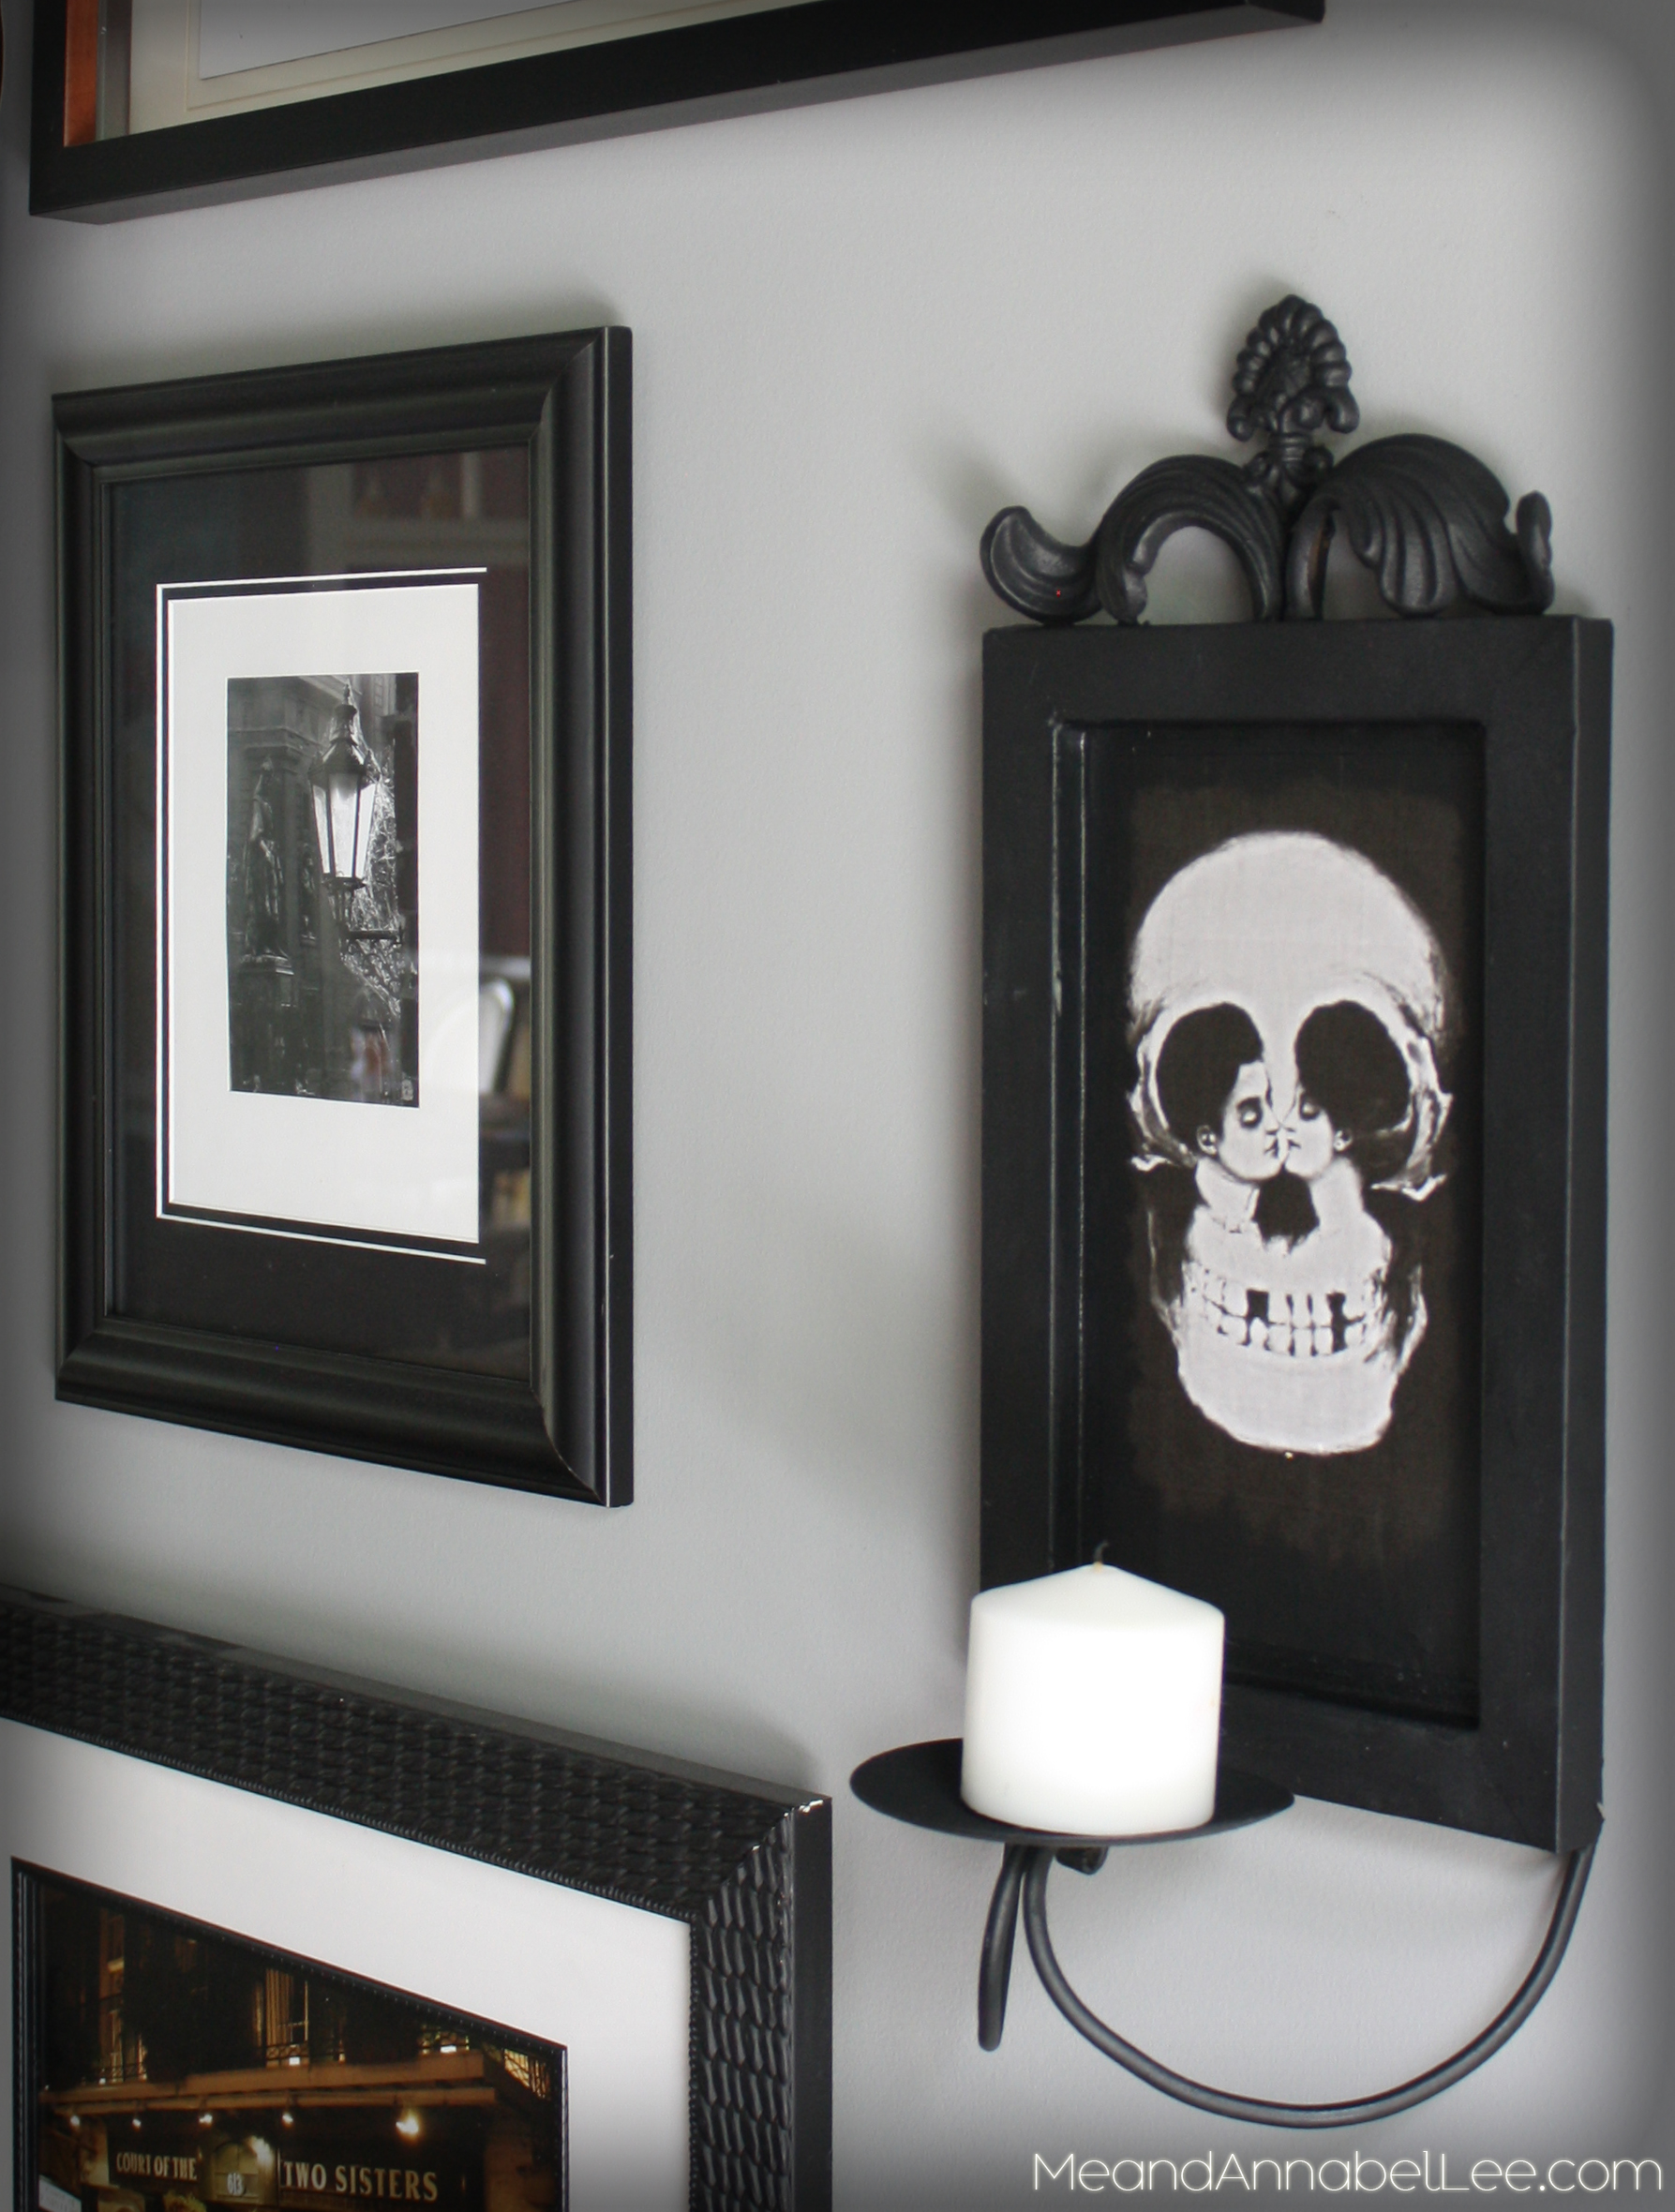 DIY Metamorphic Skull Wall Art - How to Image Transfer to Metal using Mod Podge - Trash to Treasure - Goth It Yourself - Gothic DIY - Gallery Wall - www.MeandAnnabelLee.com - Blog for all things Dark, Gothic, Victorian, & Unusual